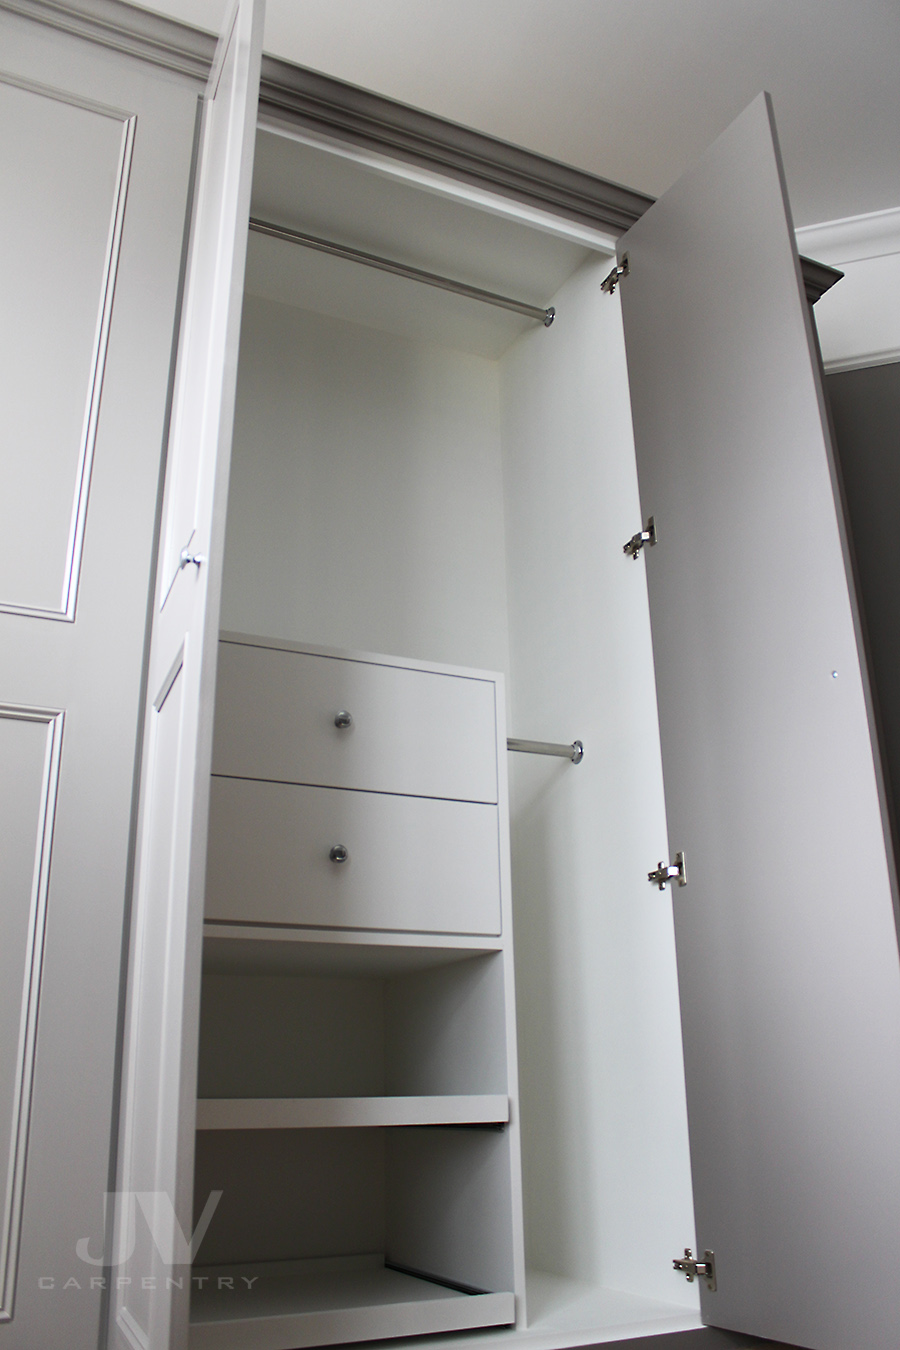 Bedroom wardrobe with drawers and shoe racks inside